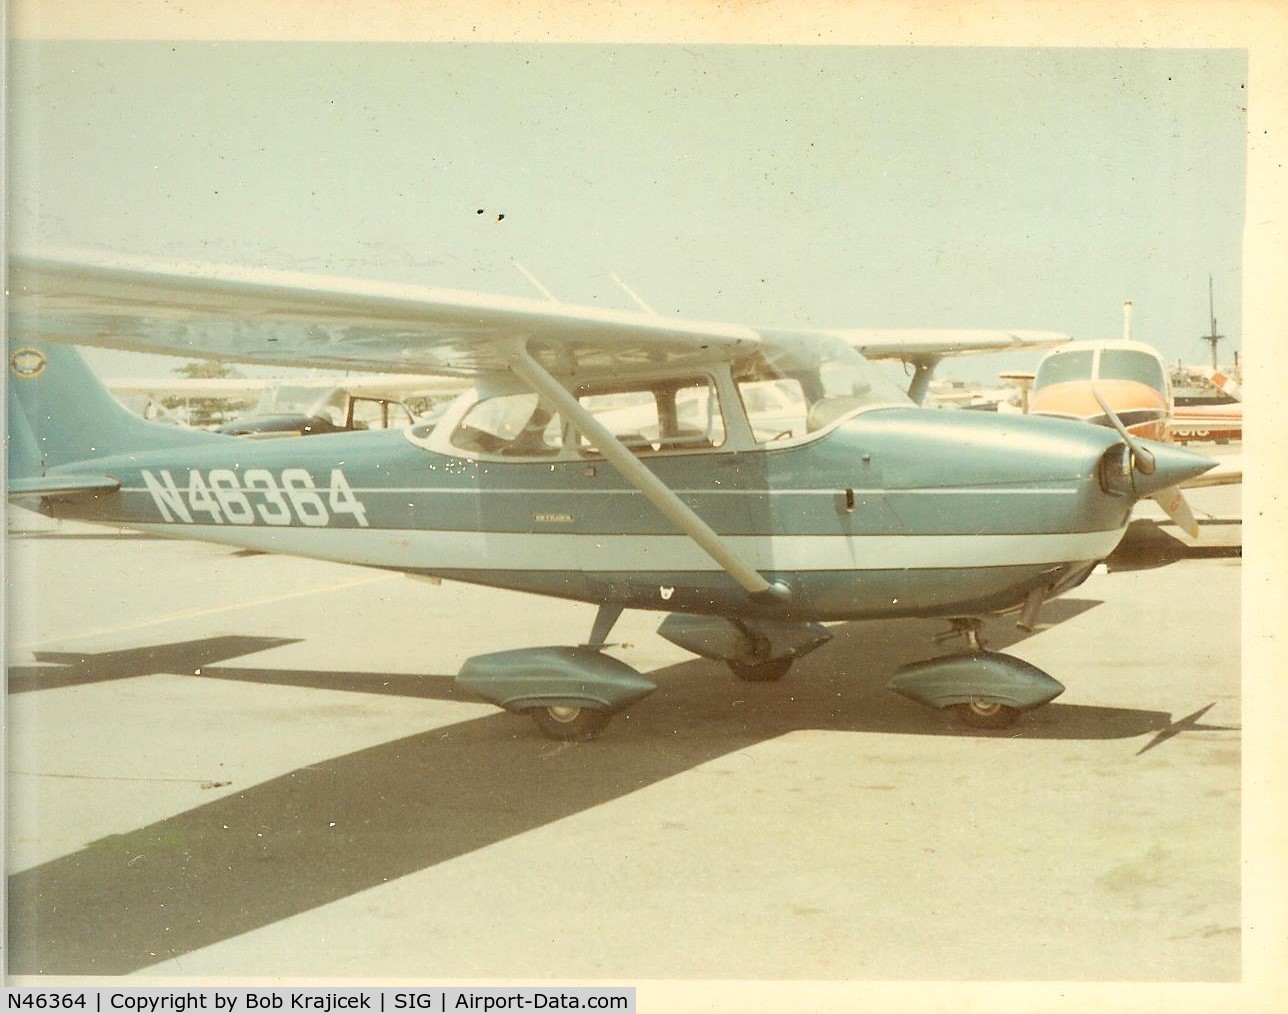 N46364, 1968 Cessna 172K Skyhawk C/N 17257215, Very old photo of the plane. Flew well at that time!